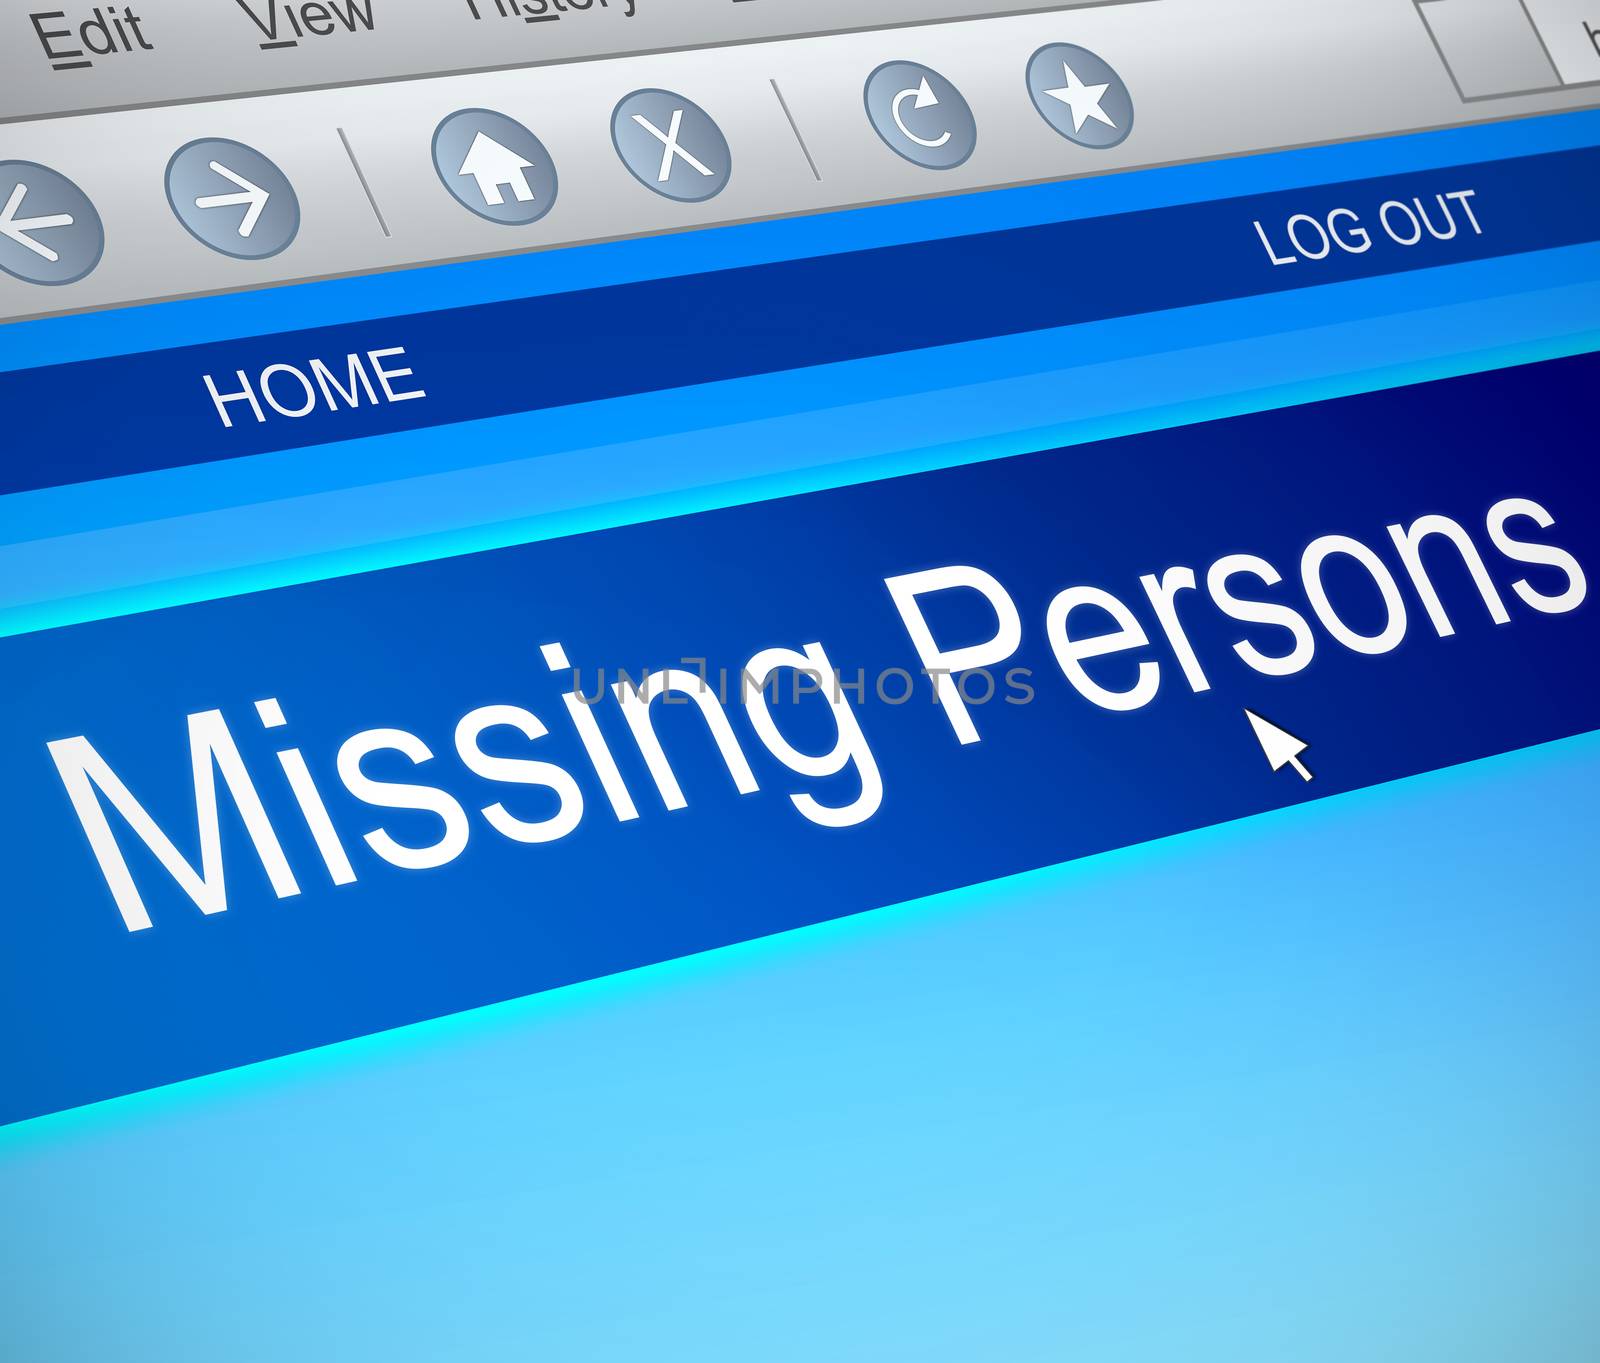 Illustration depicting a computer screen capture with a missing persons concept.